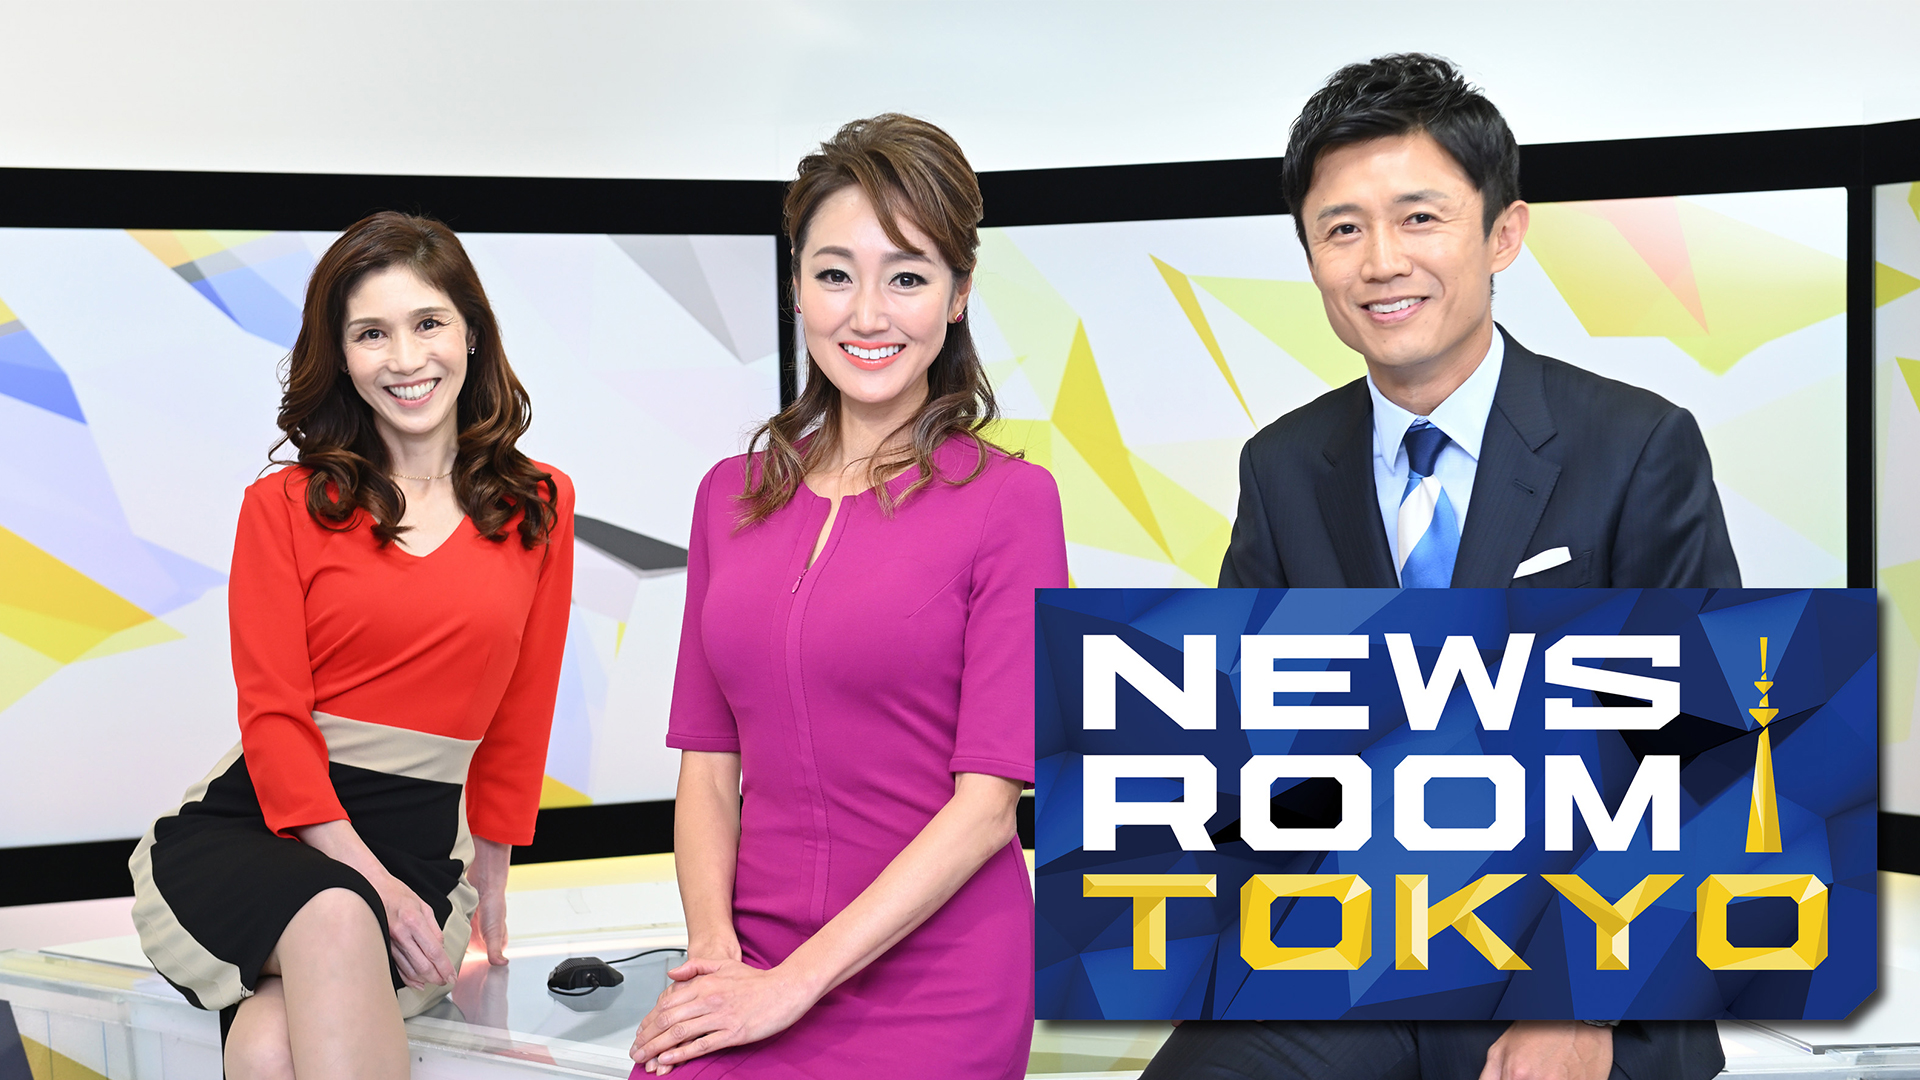 Check out Newsroom Tokyo airing on a public television station near you!